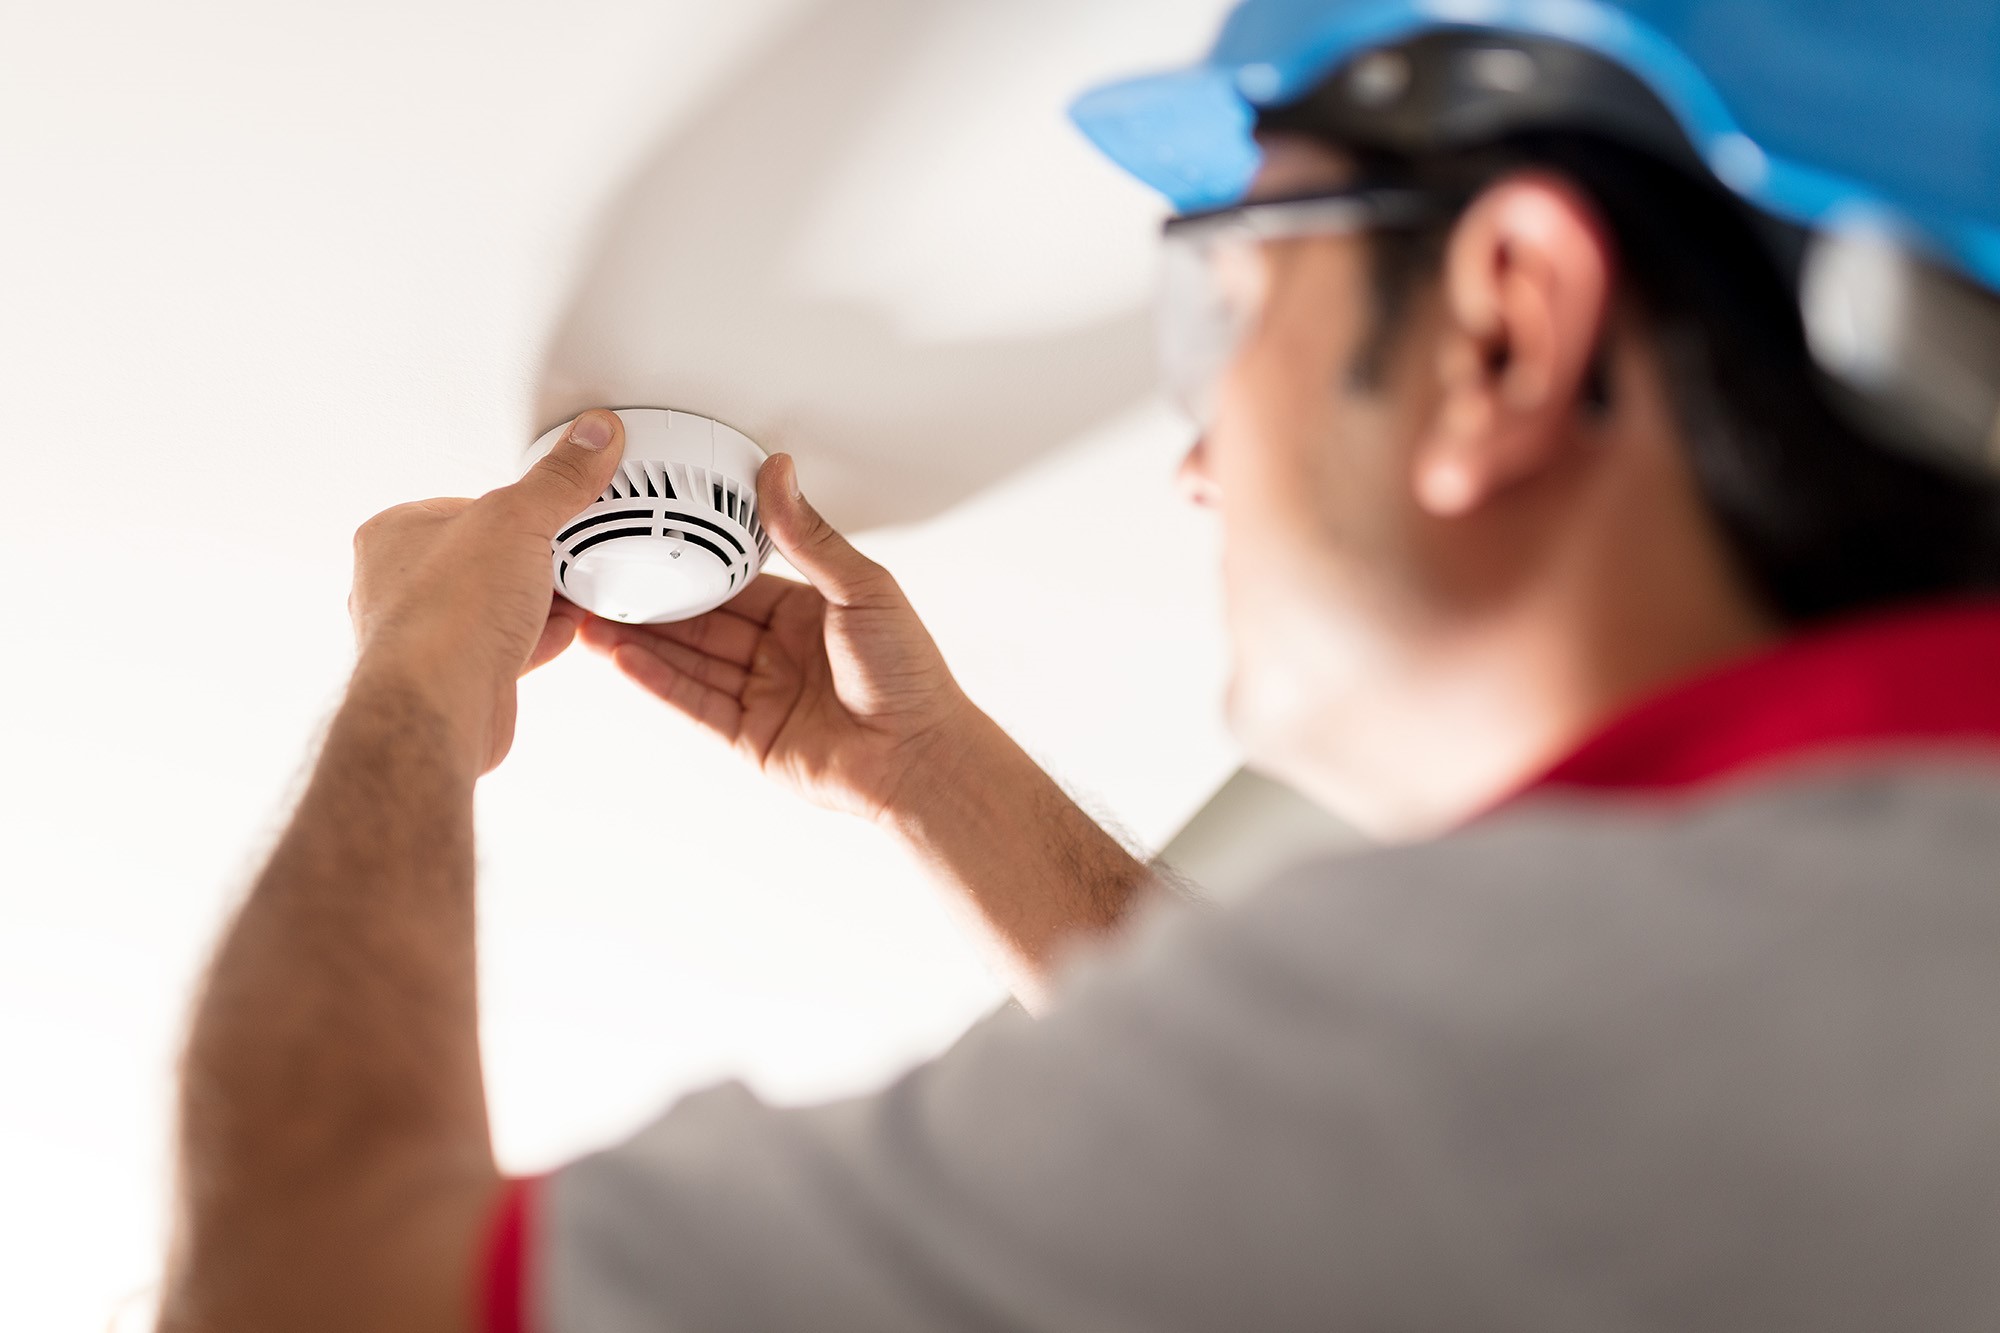 Smoke And Carbon Monoxide Alarm Regulations Are Changing